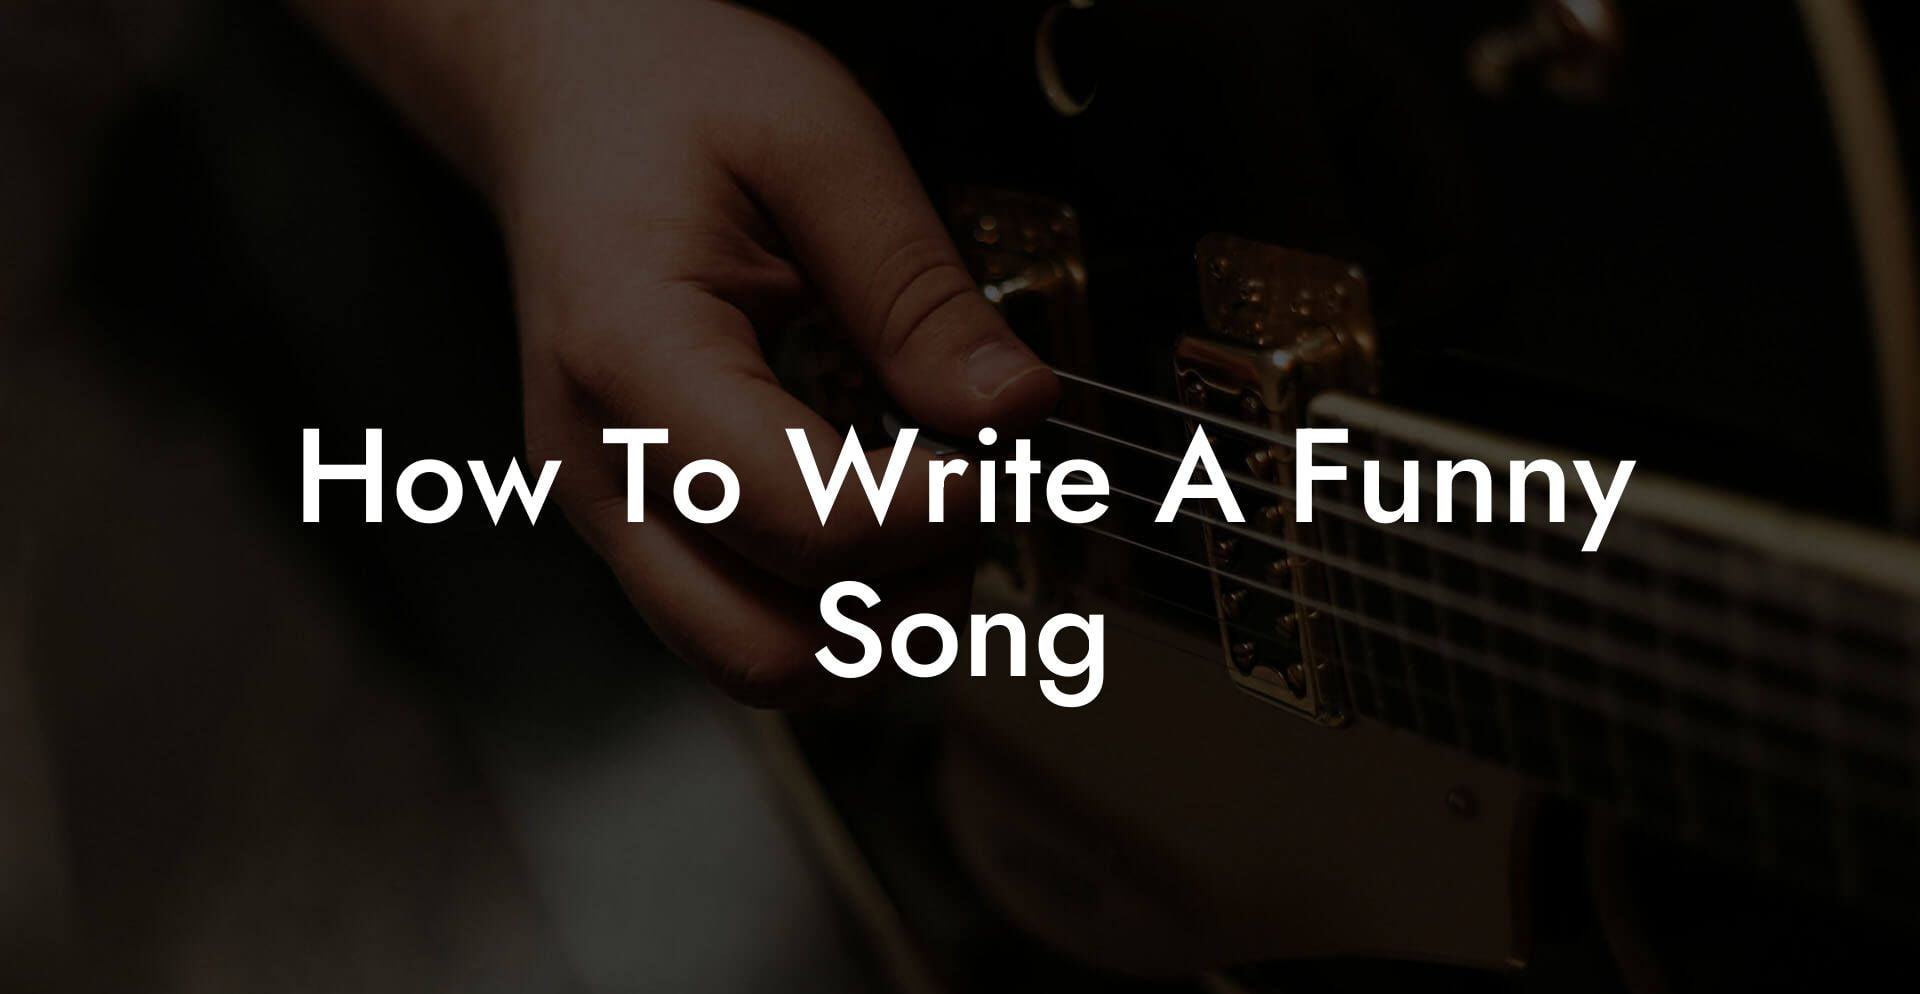 how to write a funny song lyric assistant